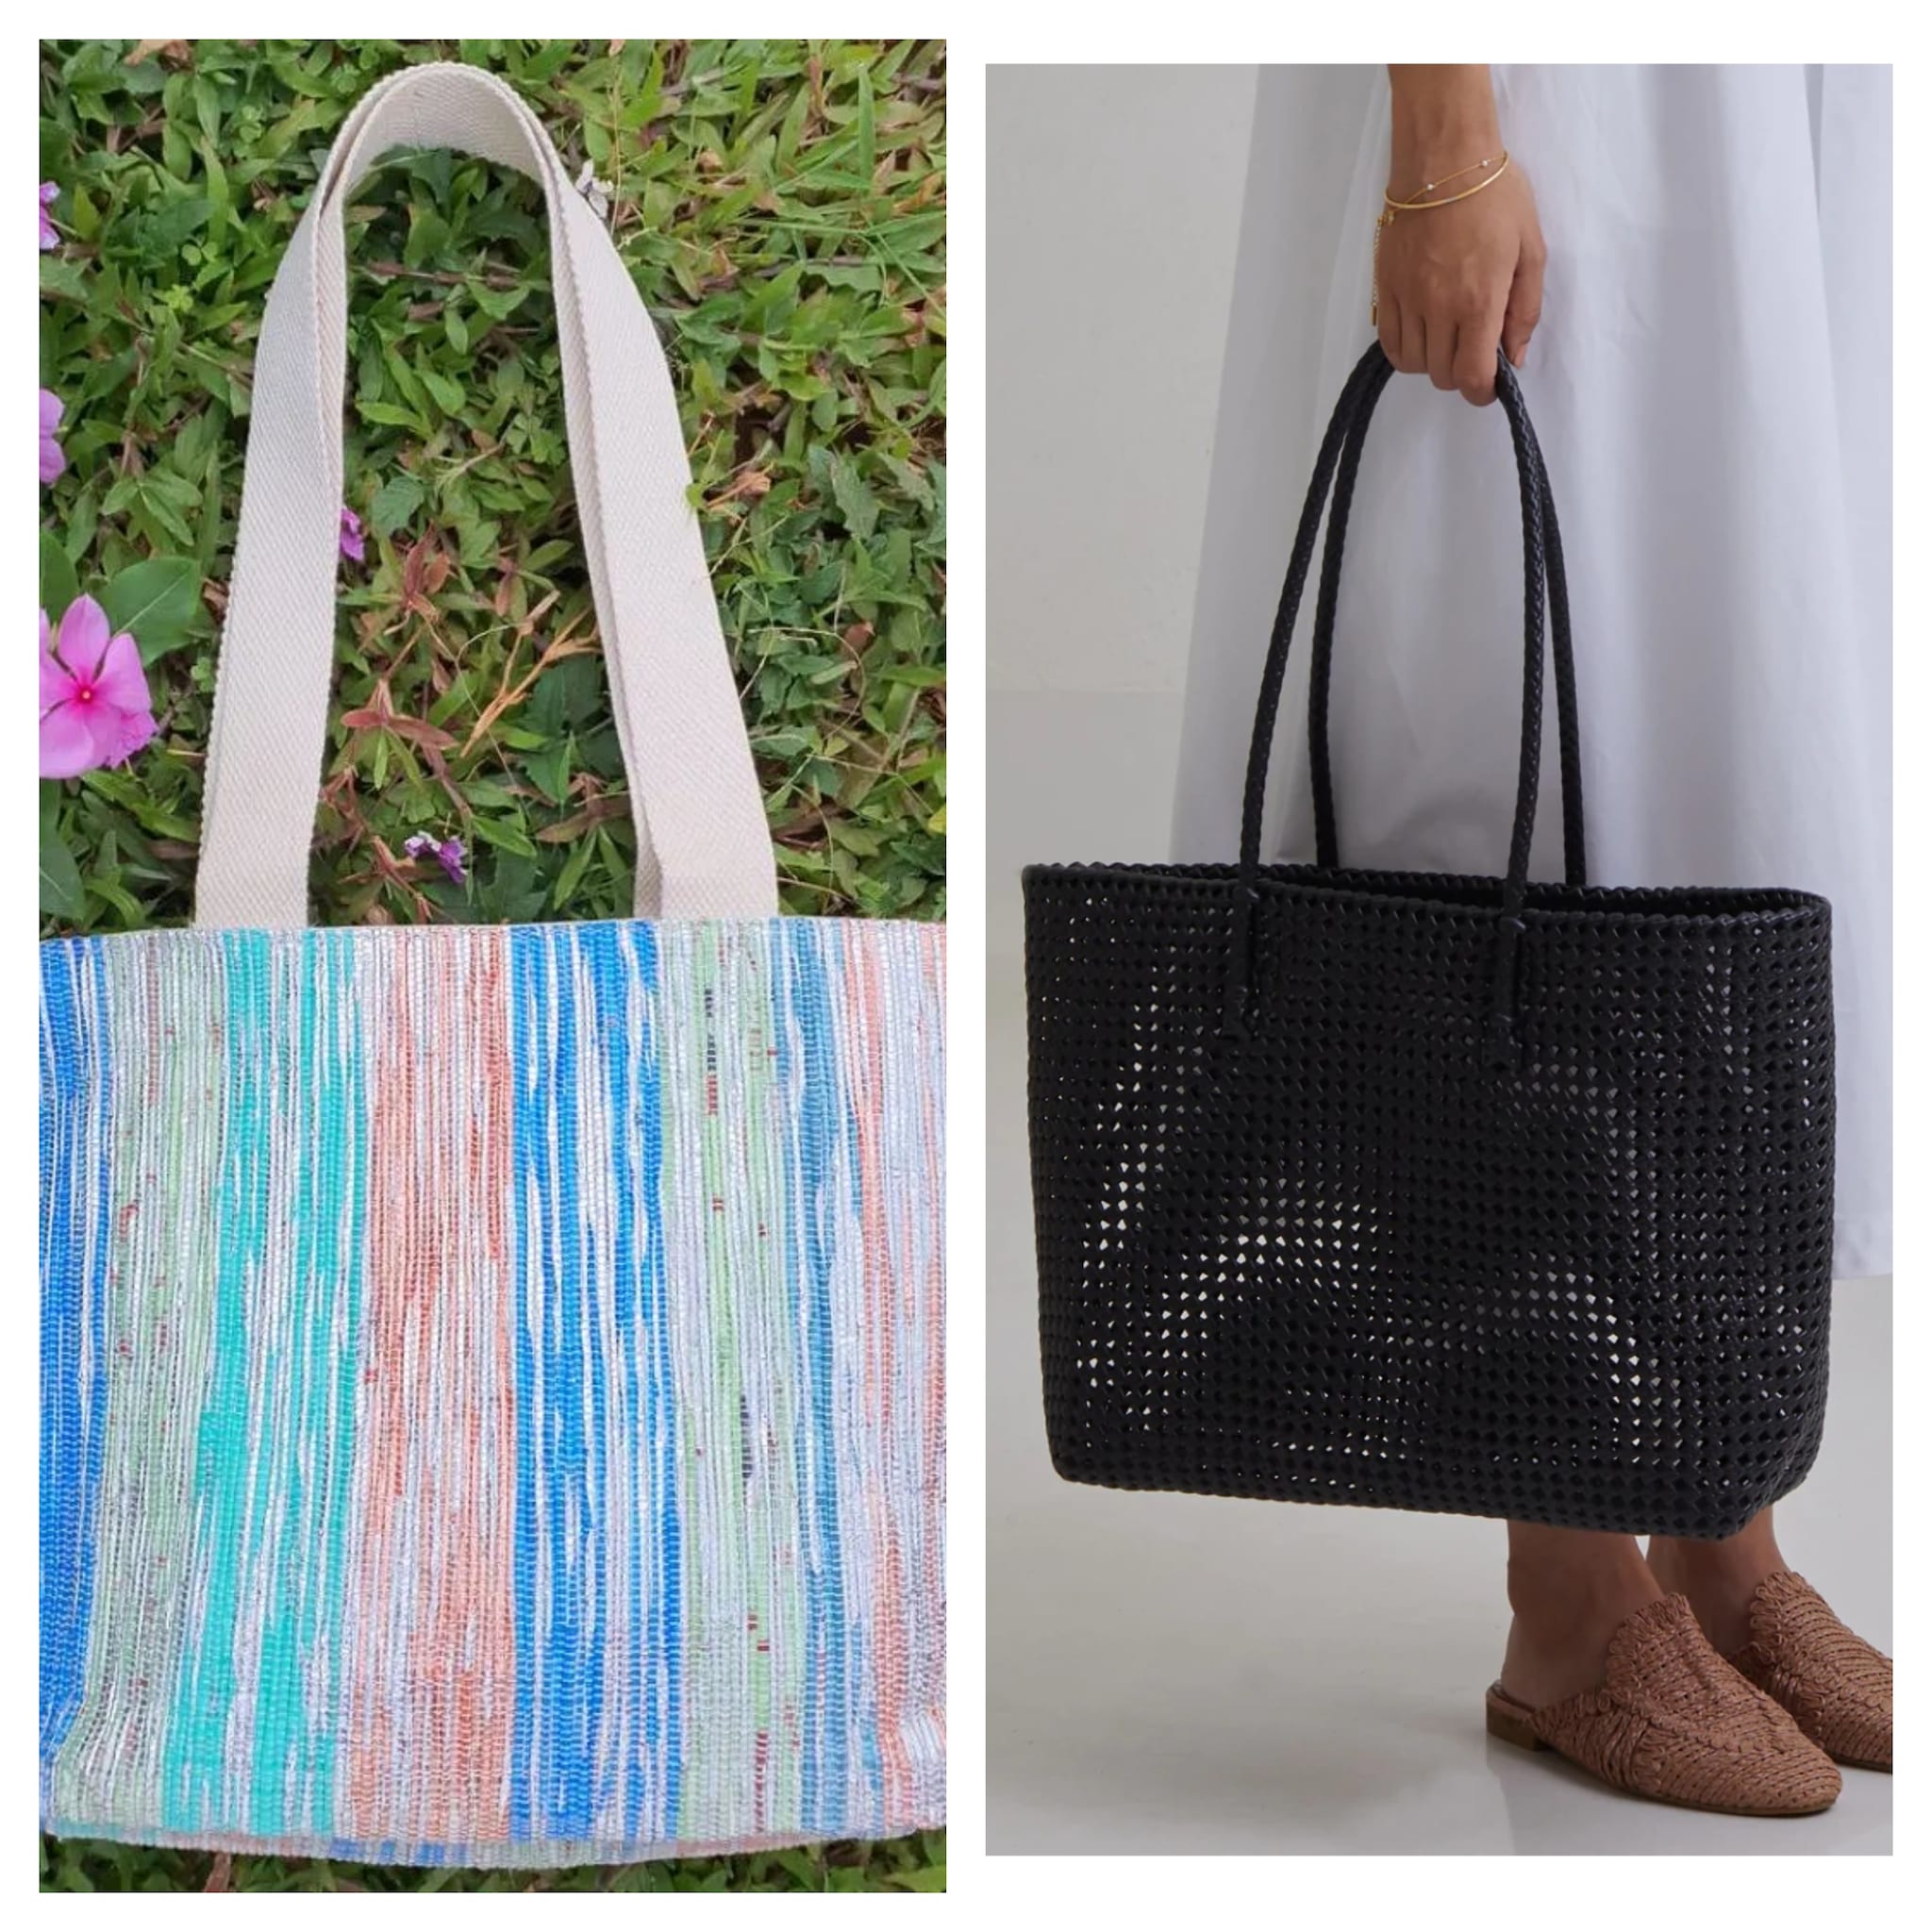 Upcycled plastic handwoven bags made by (left) reCharkha and (right) The Summer House.